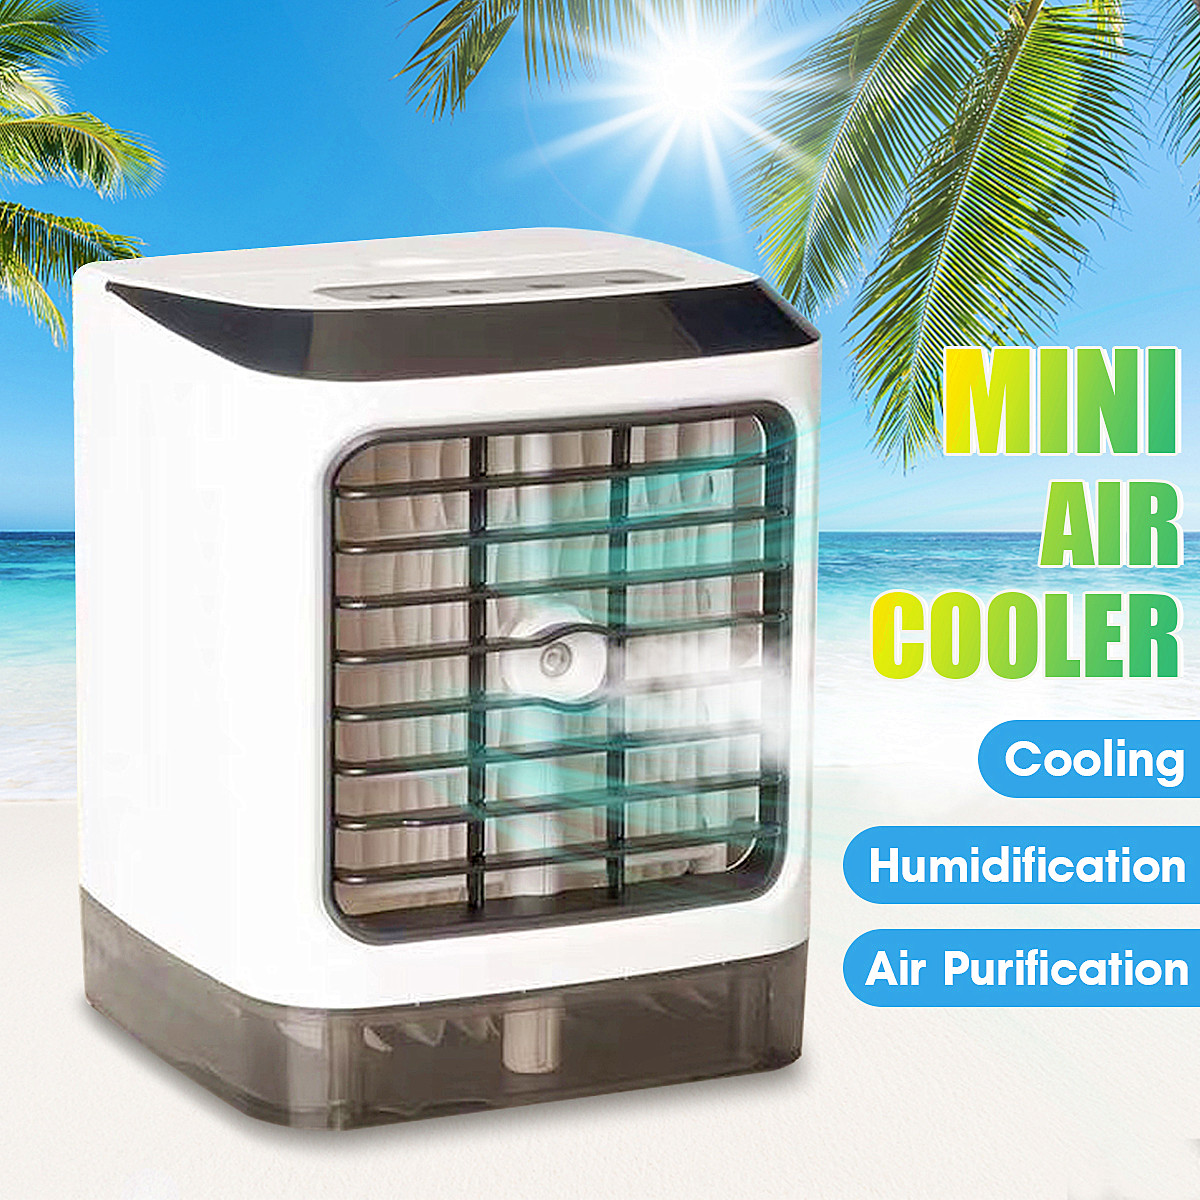 LED-480mL-Personal-Evaporative-Air-Cooler-Humidifier-Portable-Air-Conditioner-Mist-Prayer-USB-Cooler-1479420-1